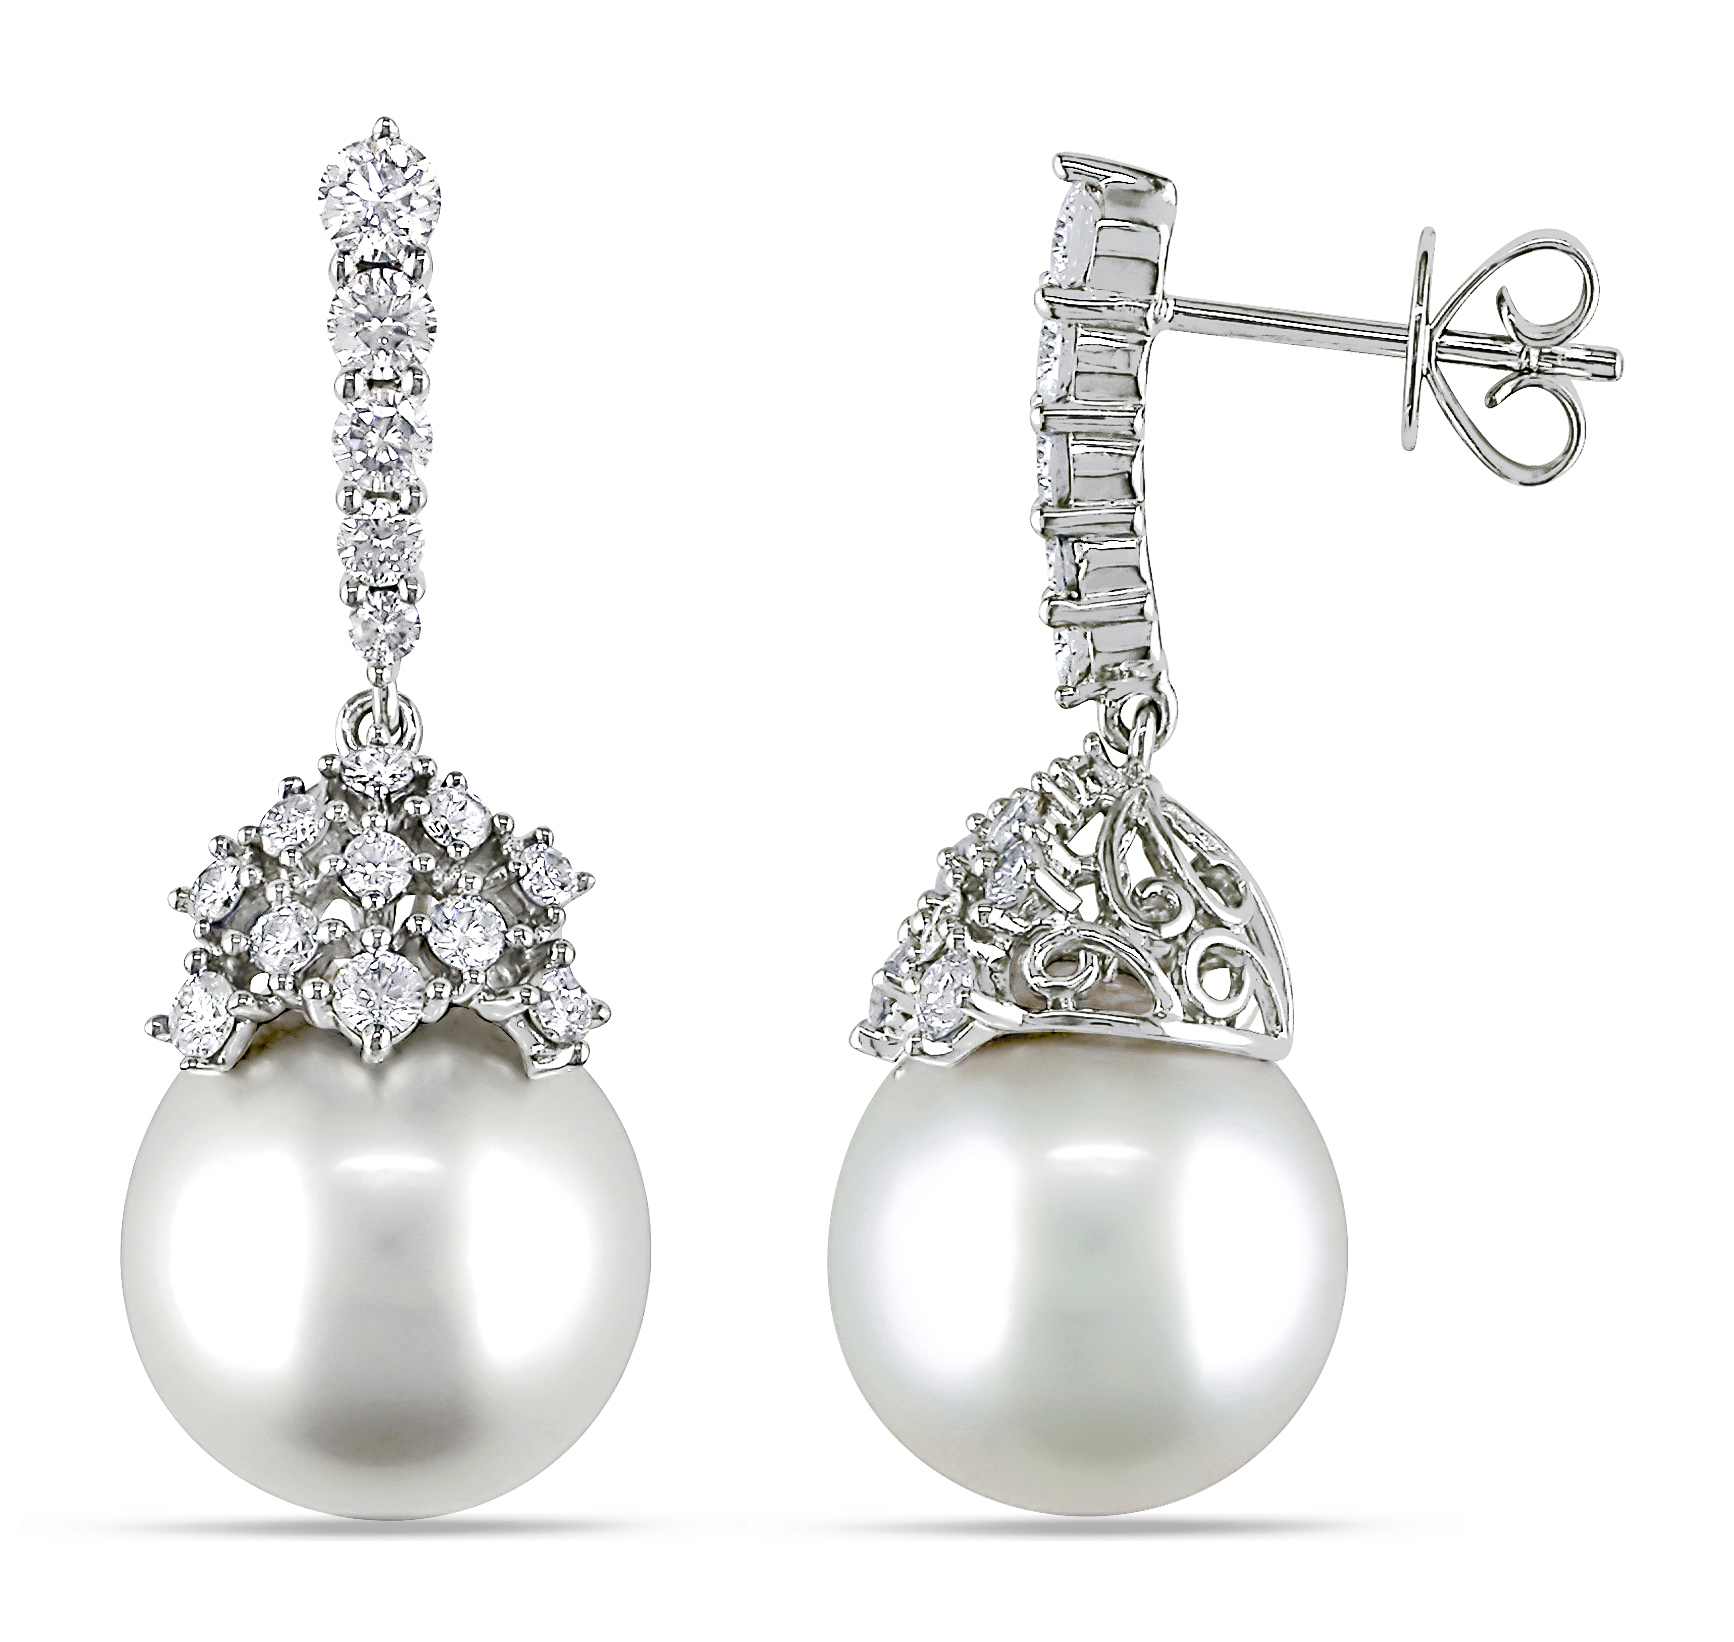 10.5 - 11 MM South Sea Cultured Pearl and 1 CT TW Diamond Drop Earrings in 14k White Gold